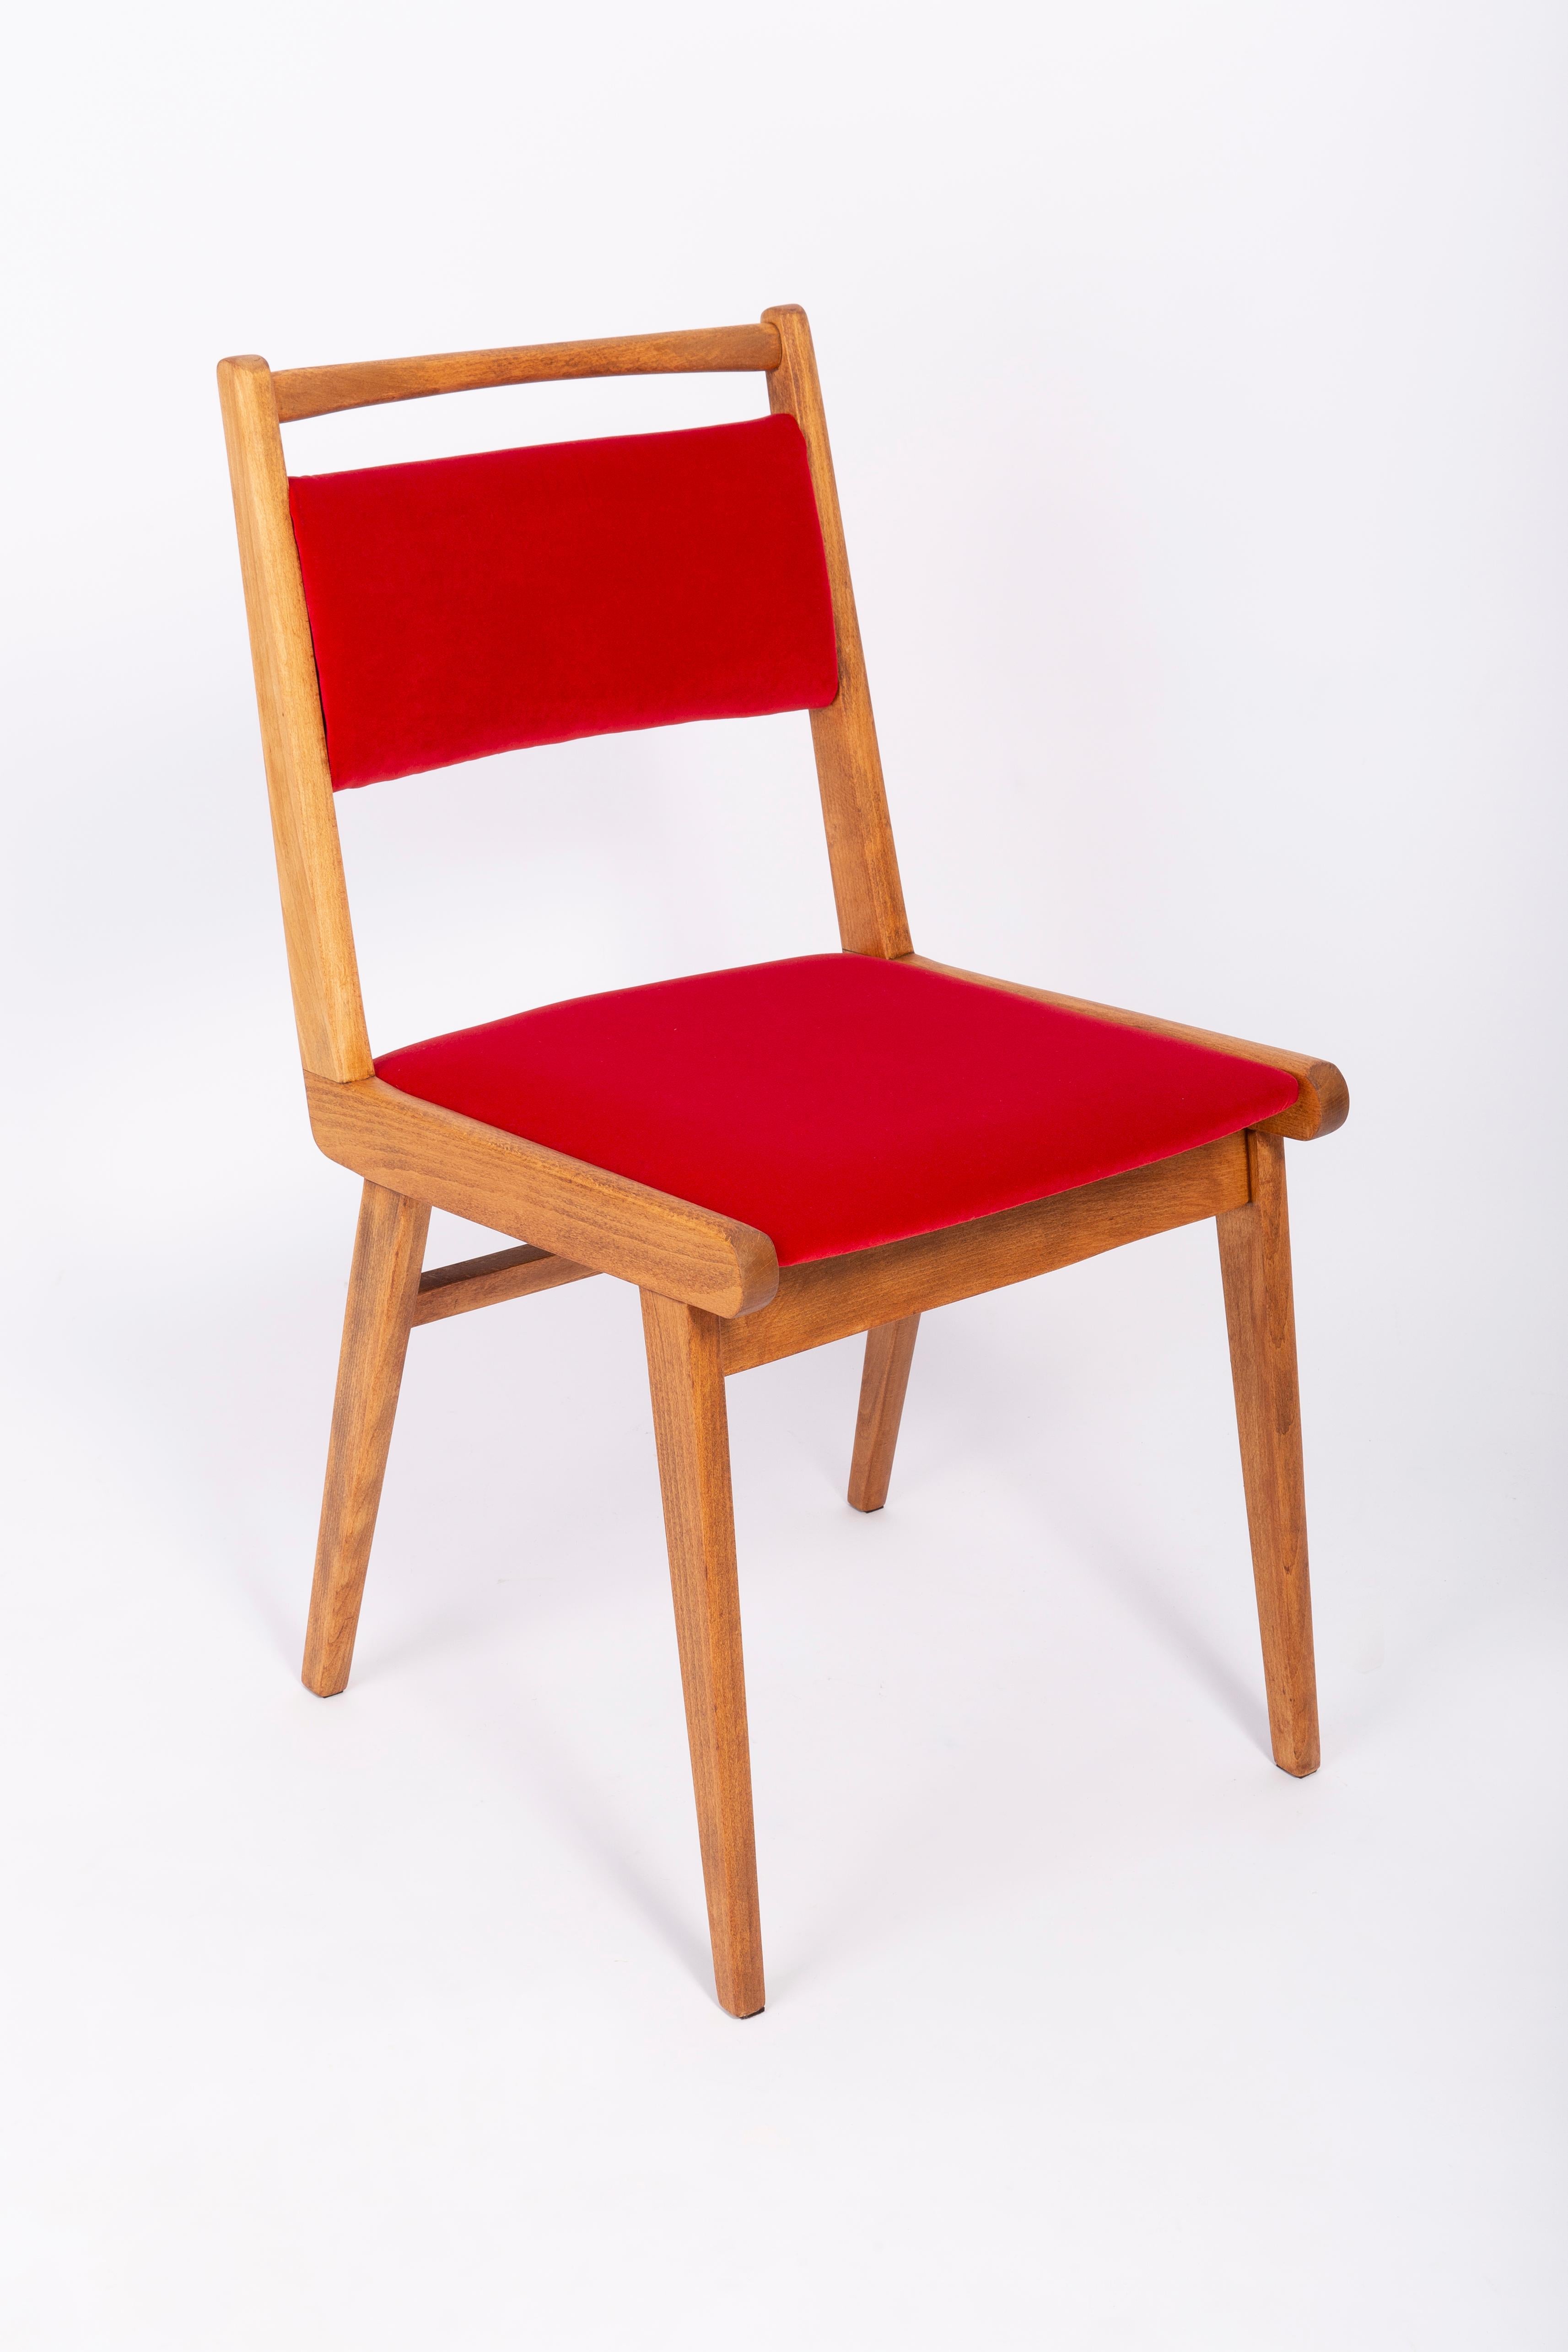 Chair designed by prof. Rajmund Halas. It is JAR type model. Made of beechwood. Chair is after a complete upholstery renovation, the woodwork has been refreshed. Seat and back is dressed in a red, durable and pleasant to the touch velvet fabric.